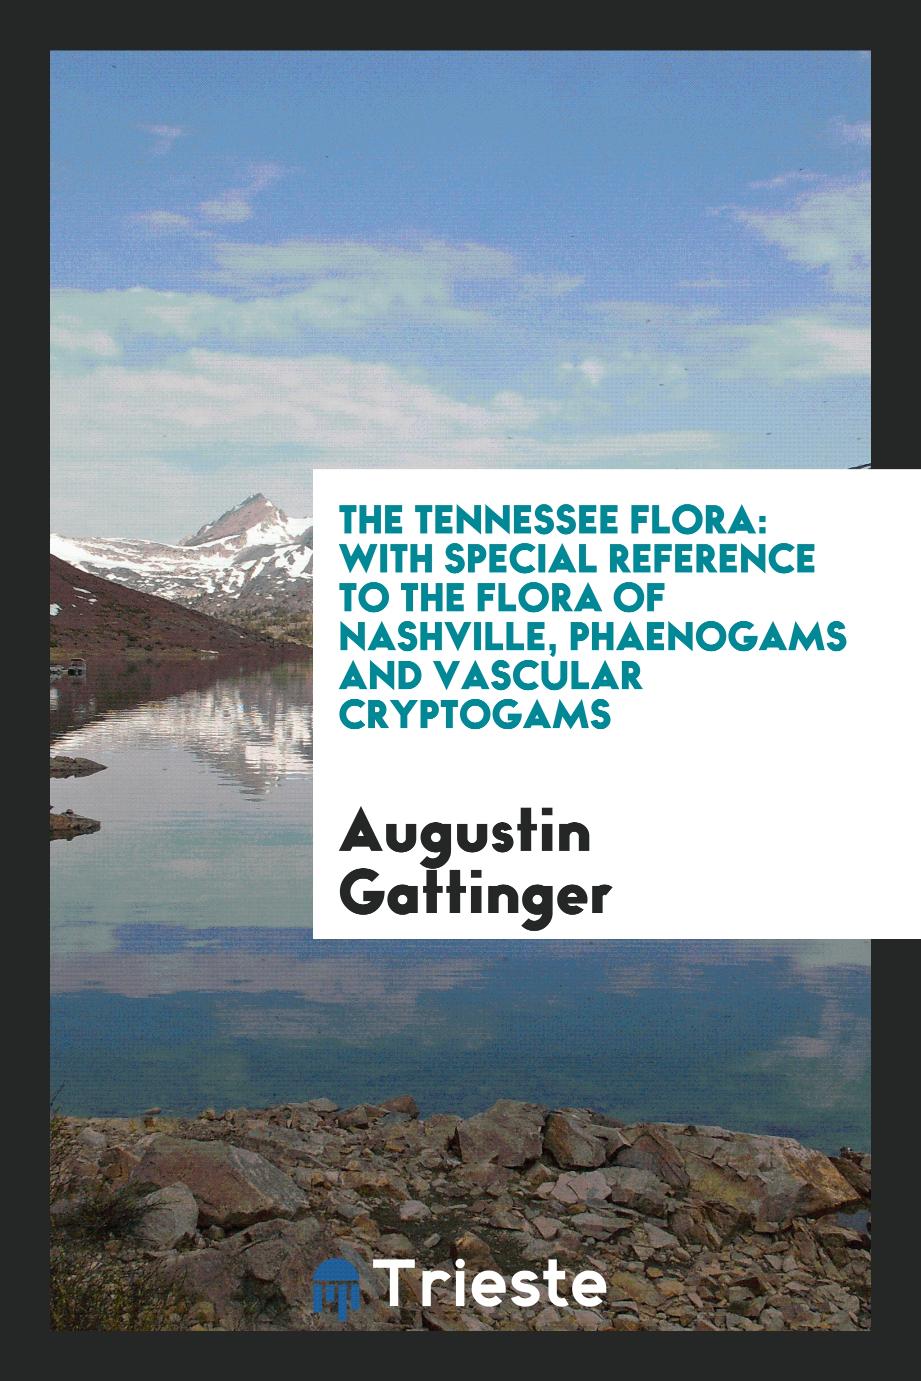 The Tennessee Flora: With Special Reference to the Flora of Nashville, Phaenogams and Vascular Cryptogams